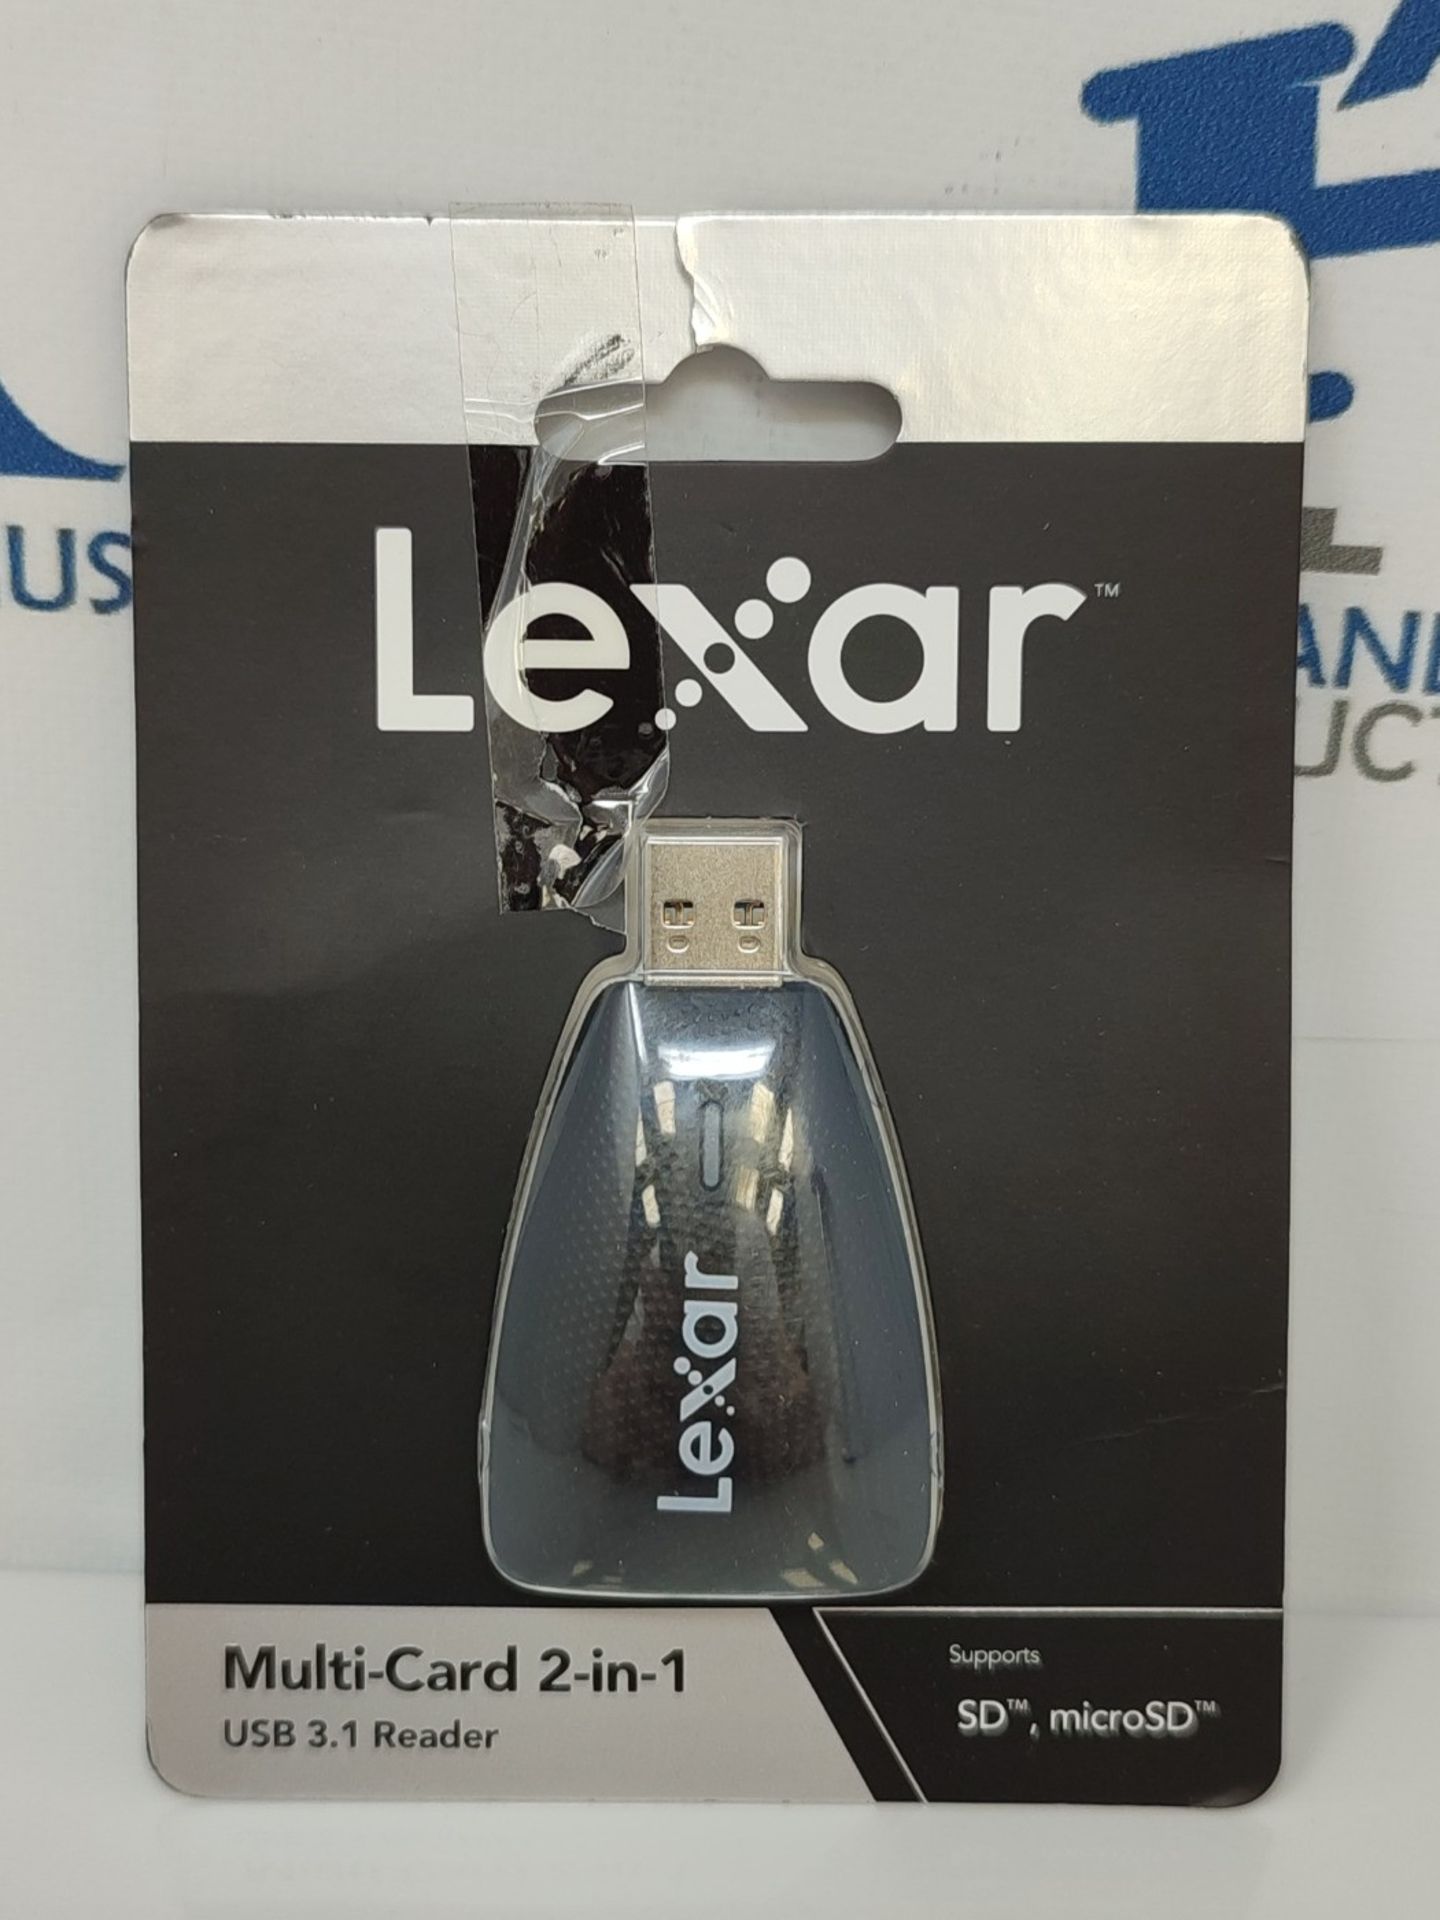 Lexar Multi-Card 2-in-1 USB 3.1 External Card Reader, Up to 312 MB/s for UHS-I UHS-II - Image 2 of 3